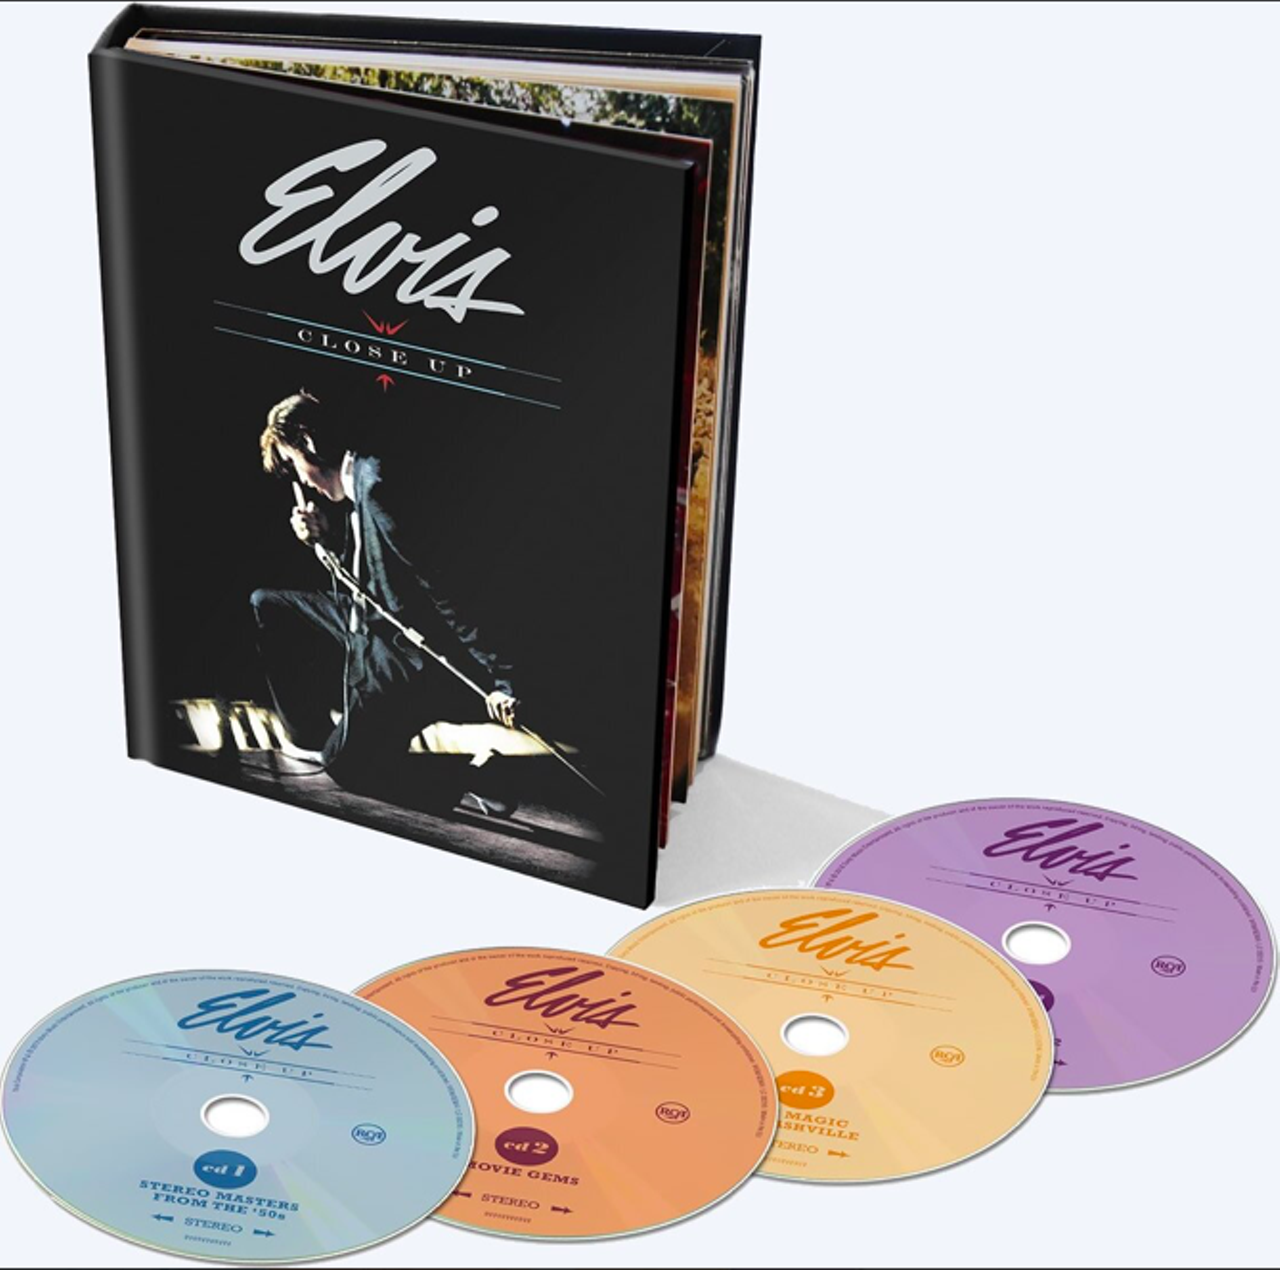 Elvis Presley: "Close Up"
Even the King of Rock 'n' Roll knew San Antonio crowds were special. The final CD in this four-disk box set of Elvis rarities documents a 23-song concert recorded in 1972 in front of Alamo City fans, who are clearly going nuts.
Photo via RCA/BMG Heritage